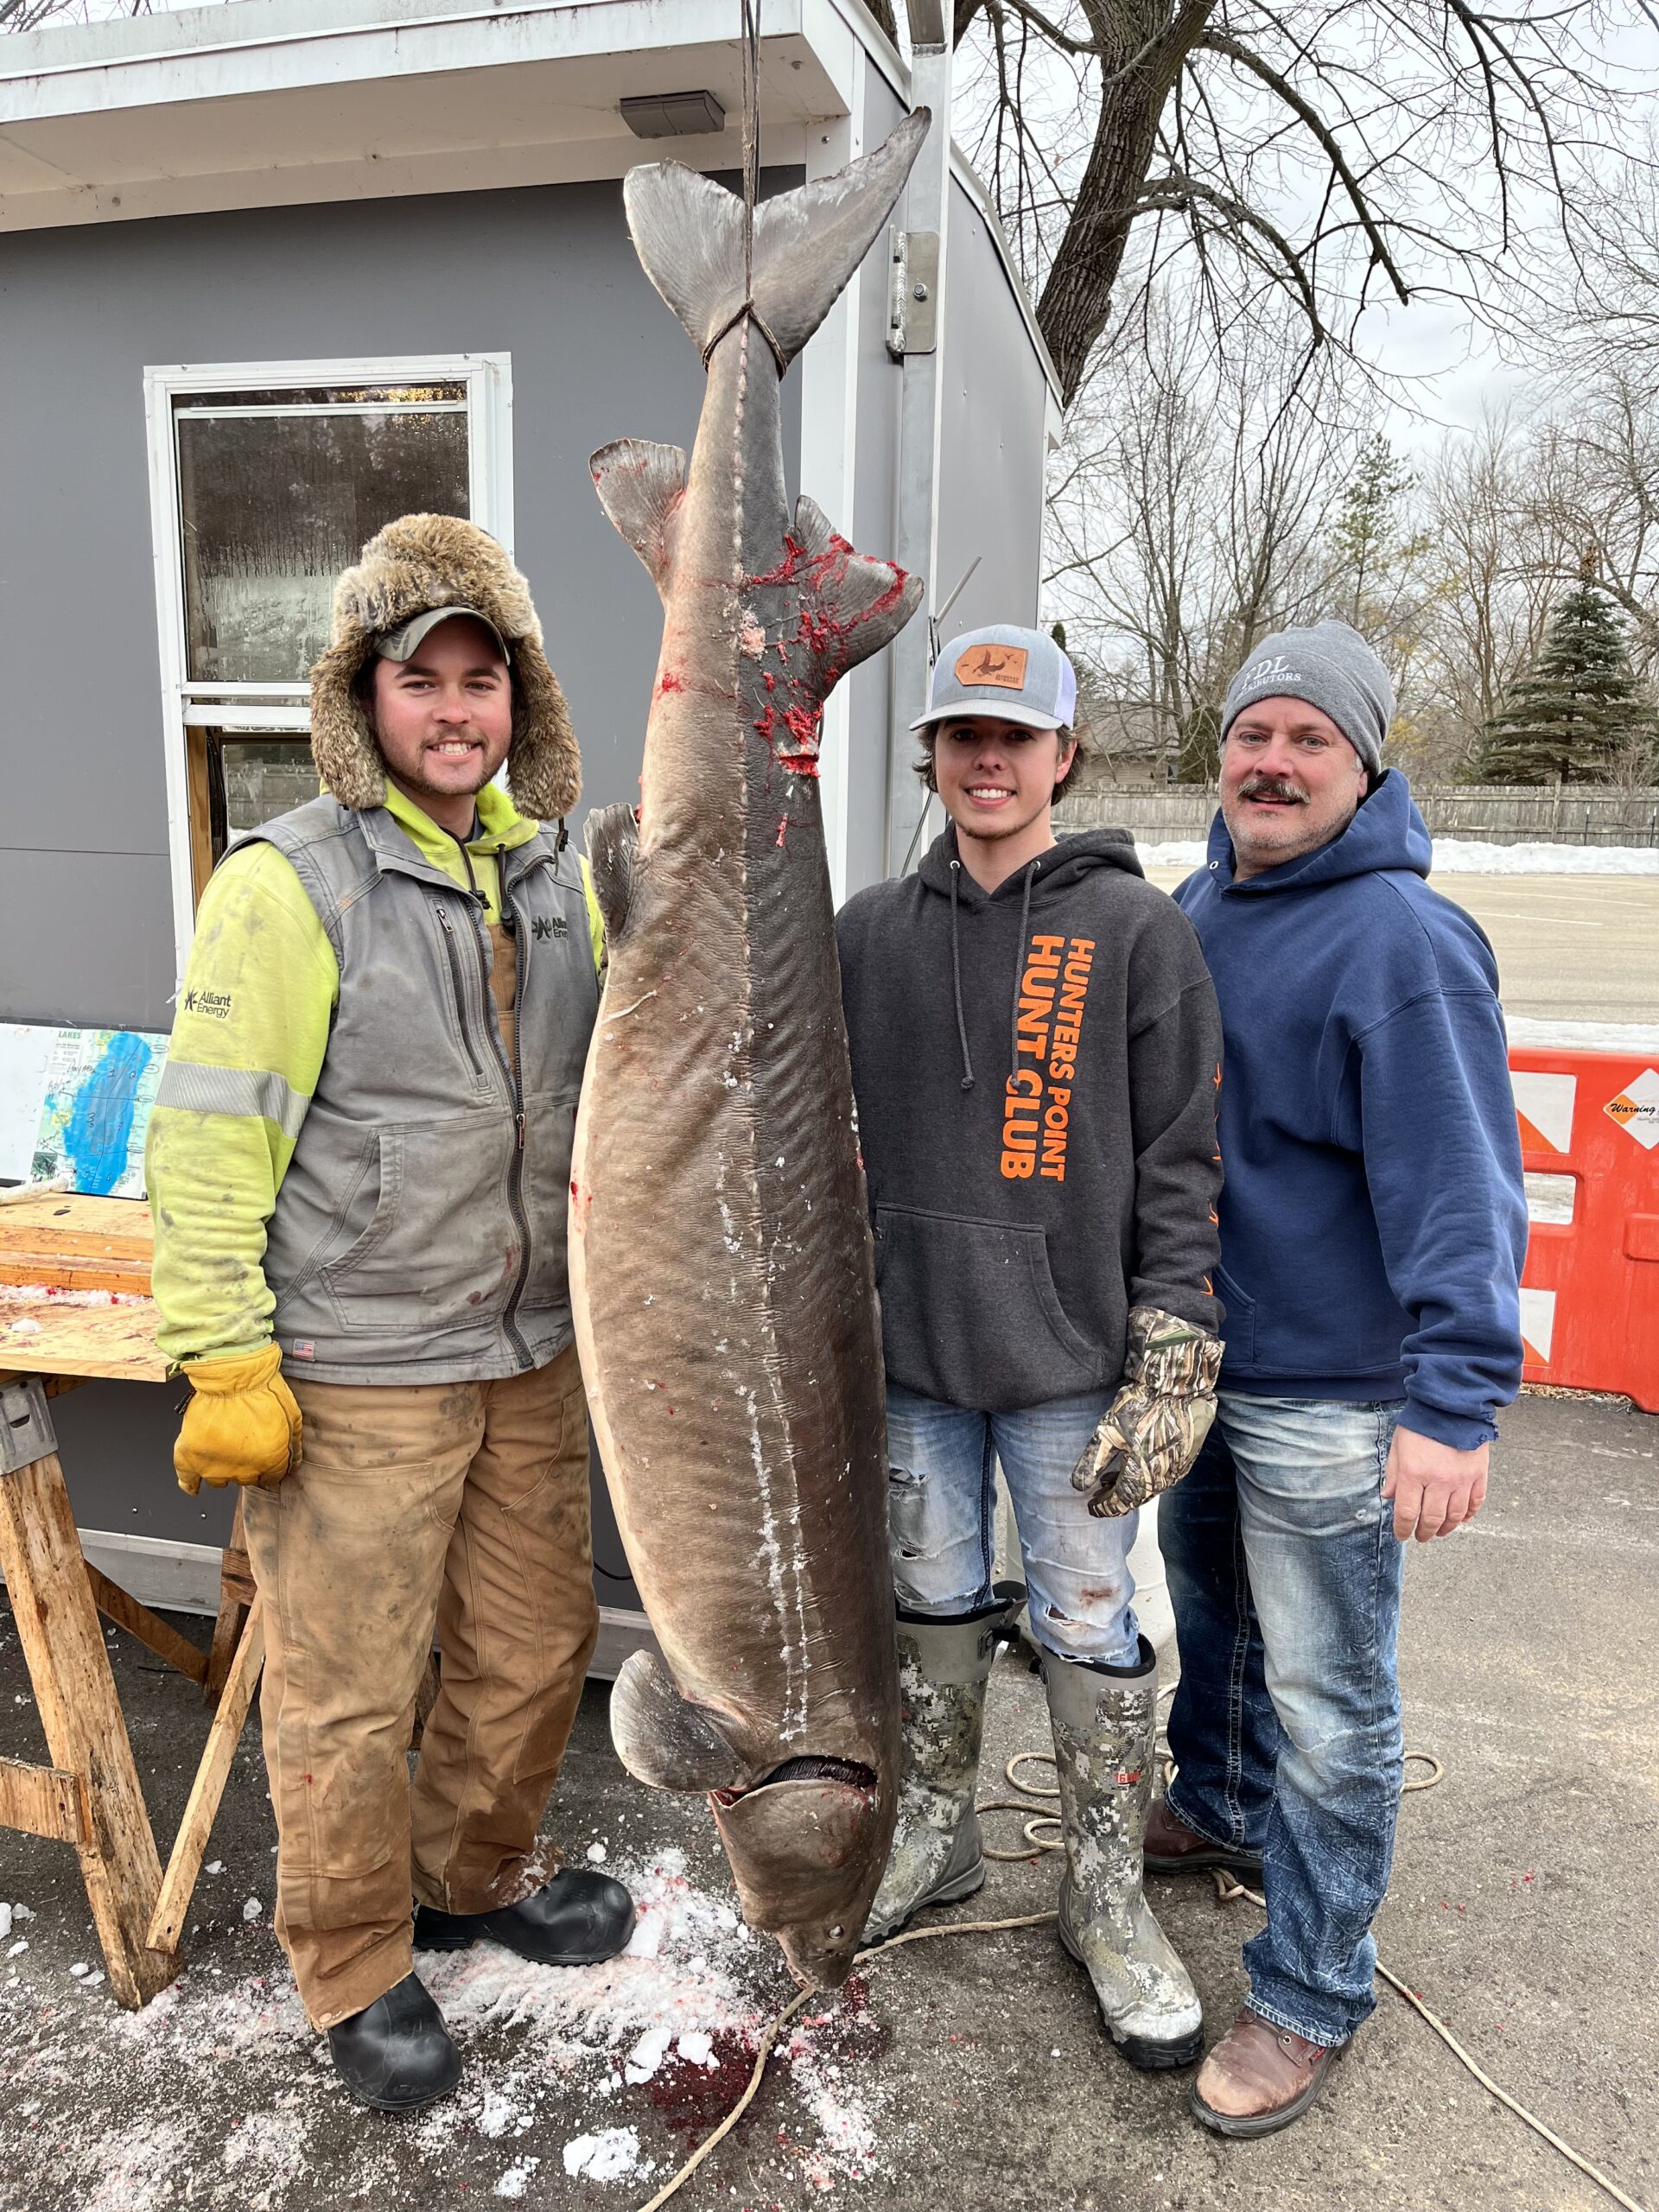 Teenager endures 'fight of his life' with enormous sturgeon